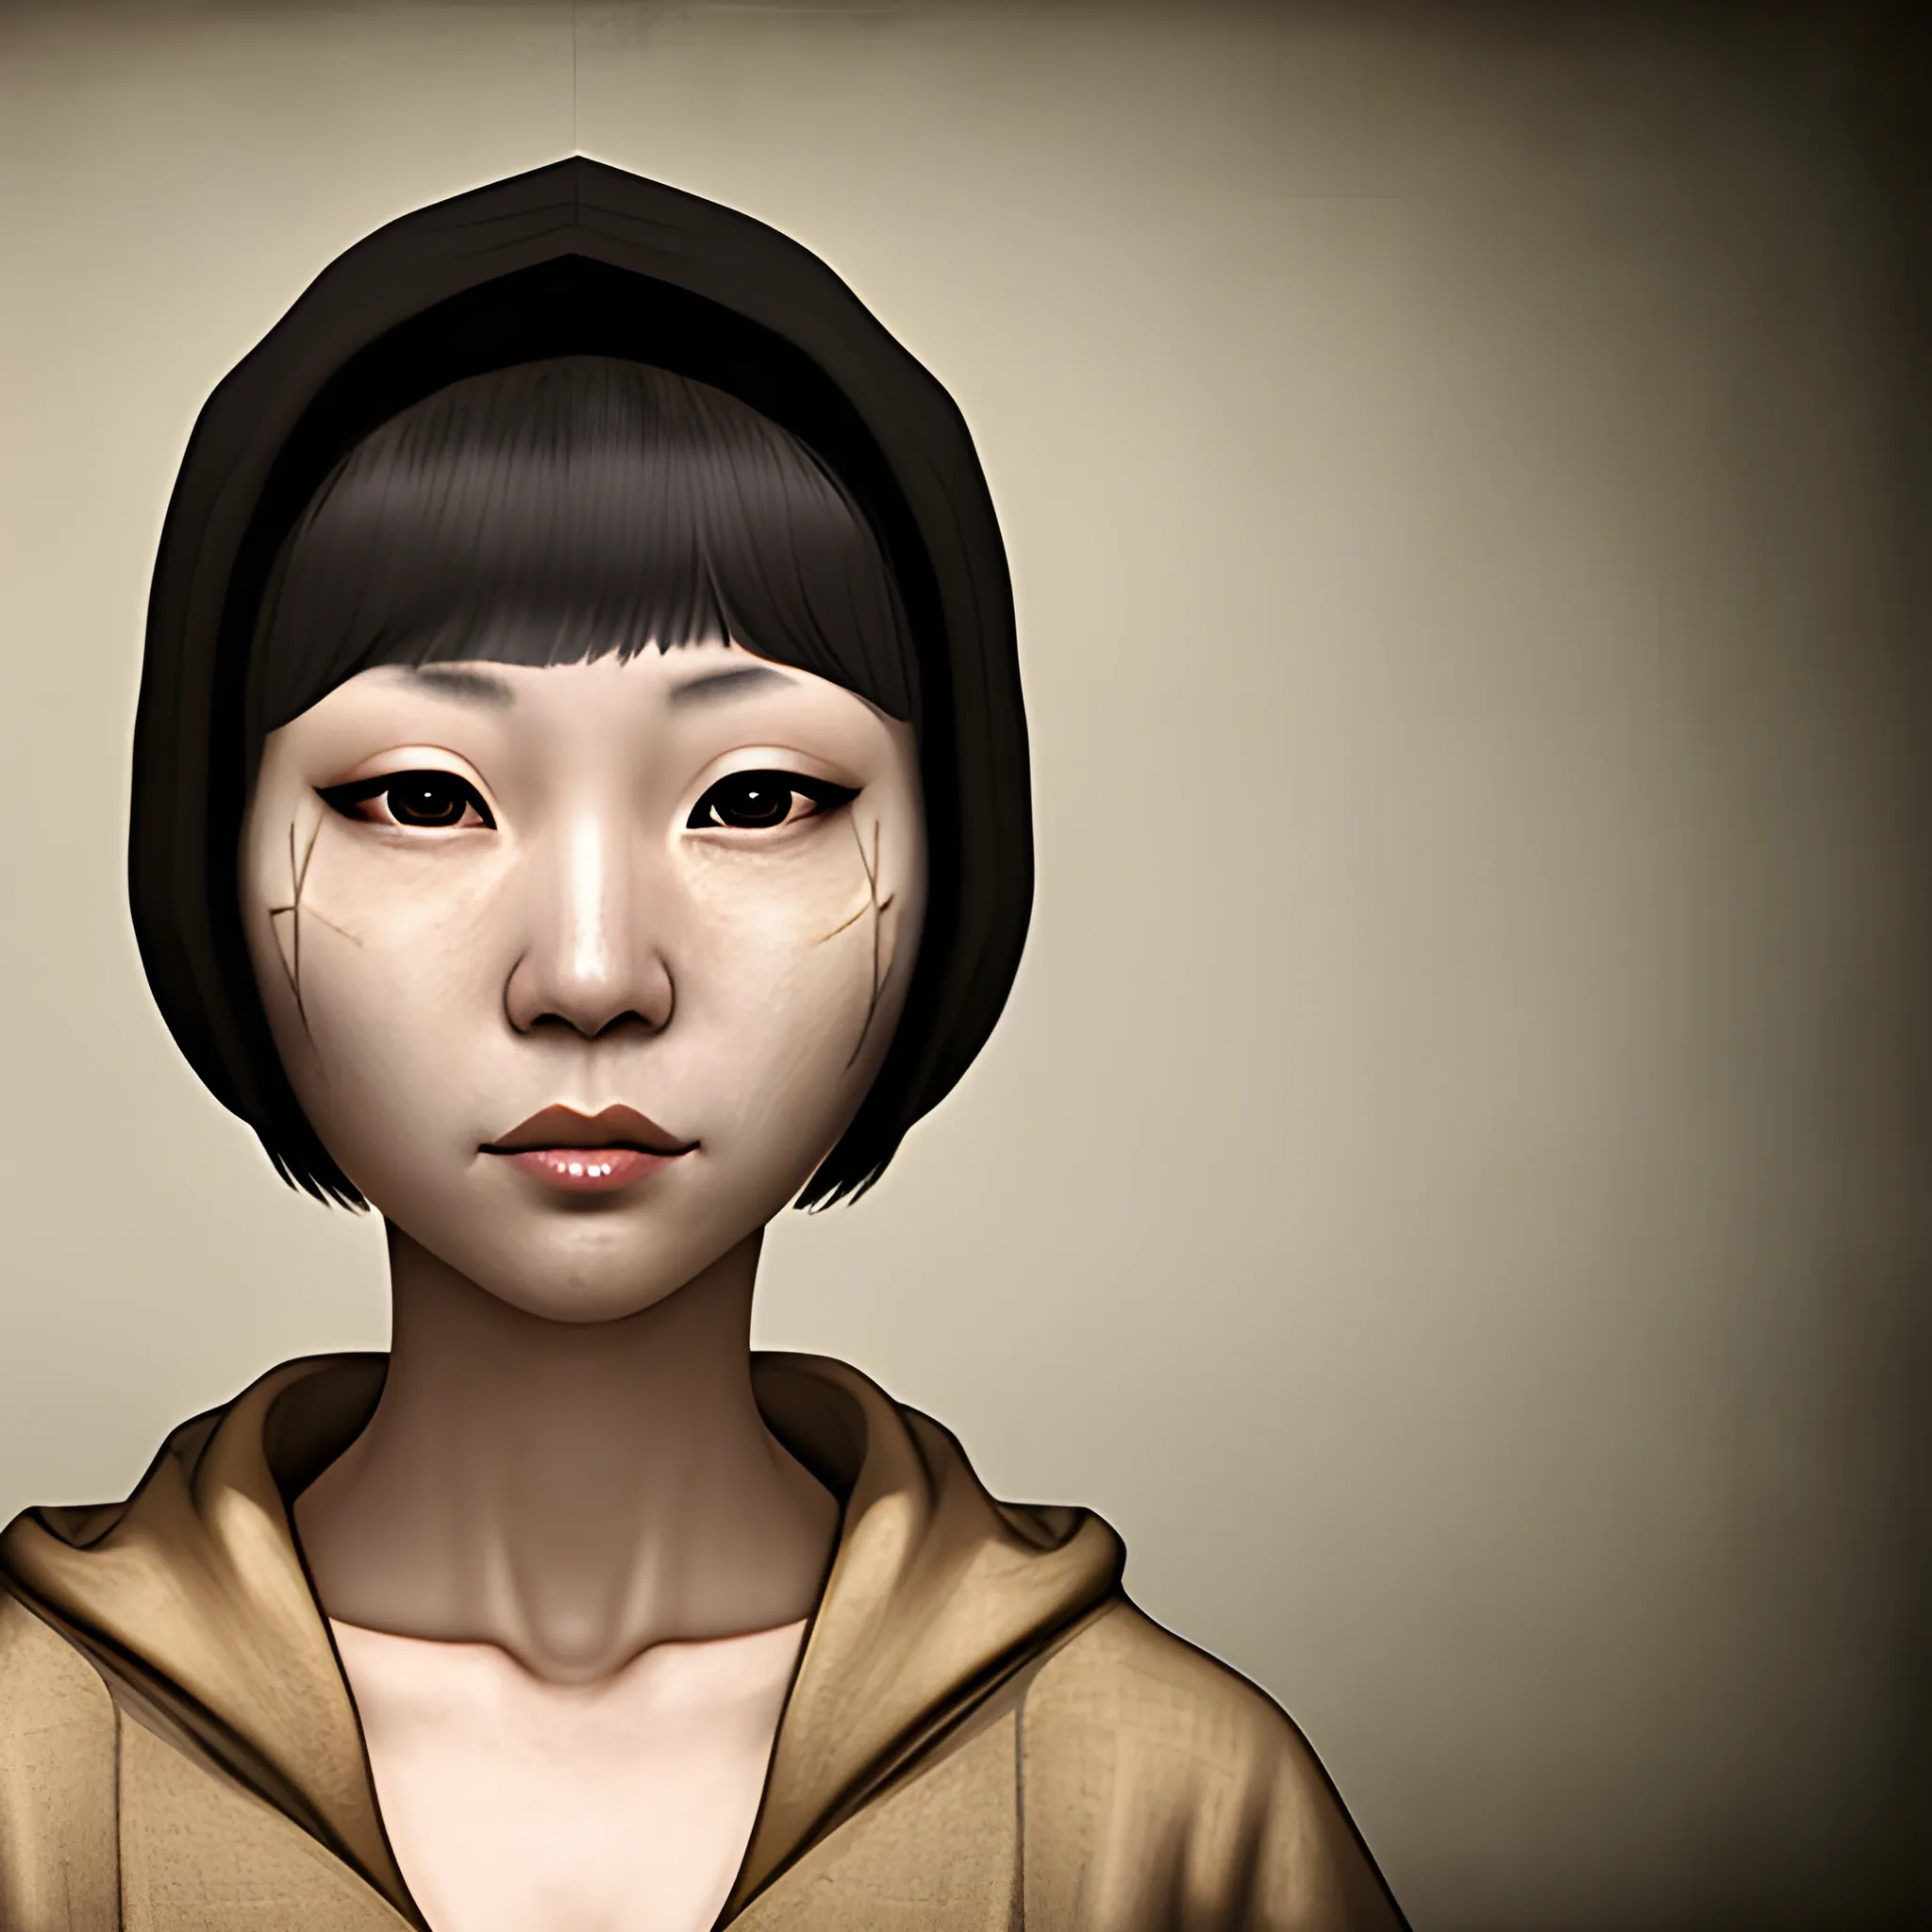 In the style of fallout 1, (masterpiece), (portrait photography), (portrait of an adult Chinese female), no makeup, dirty face, flat chested, beige linen robes with hood, bob-cut hairstyle, black hair, black eyes